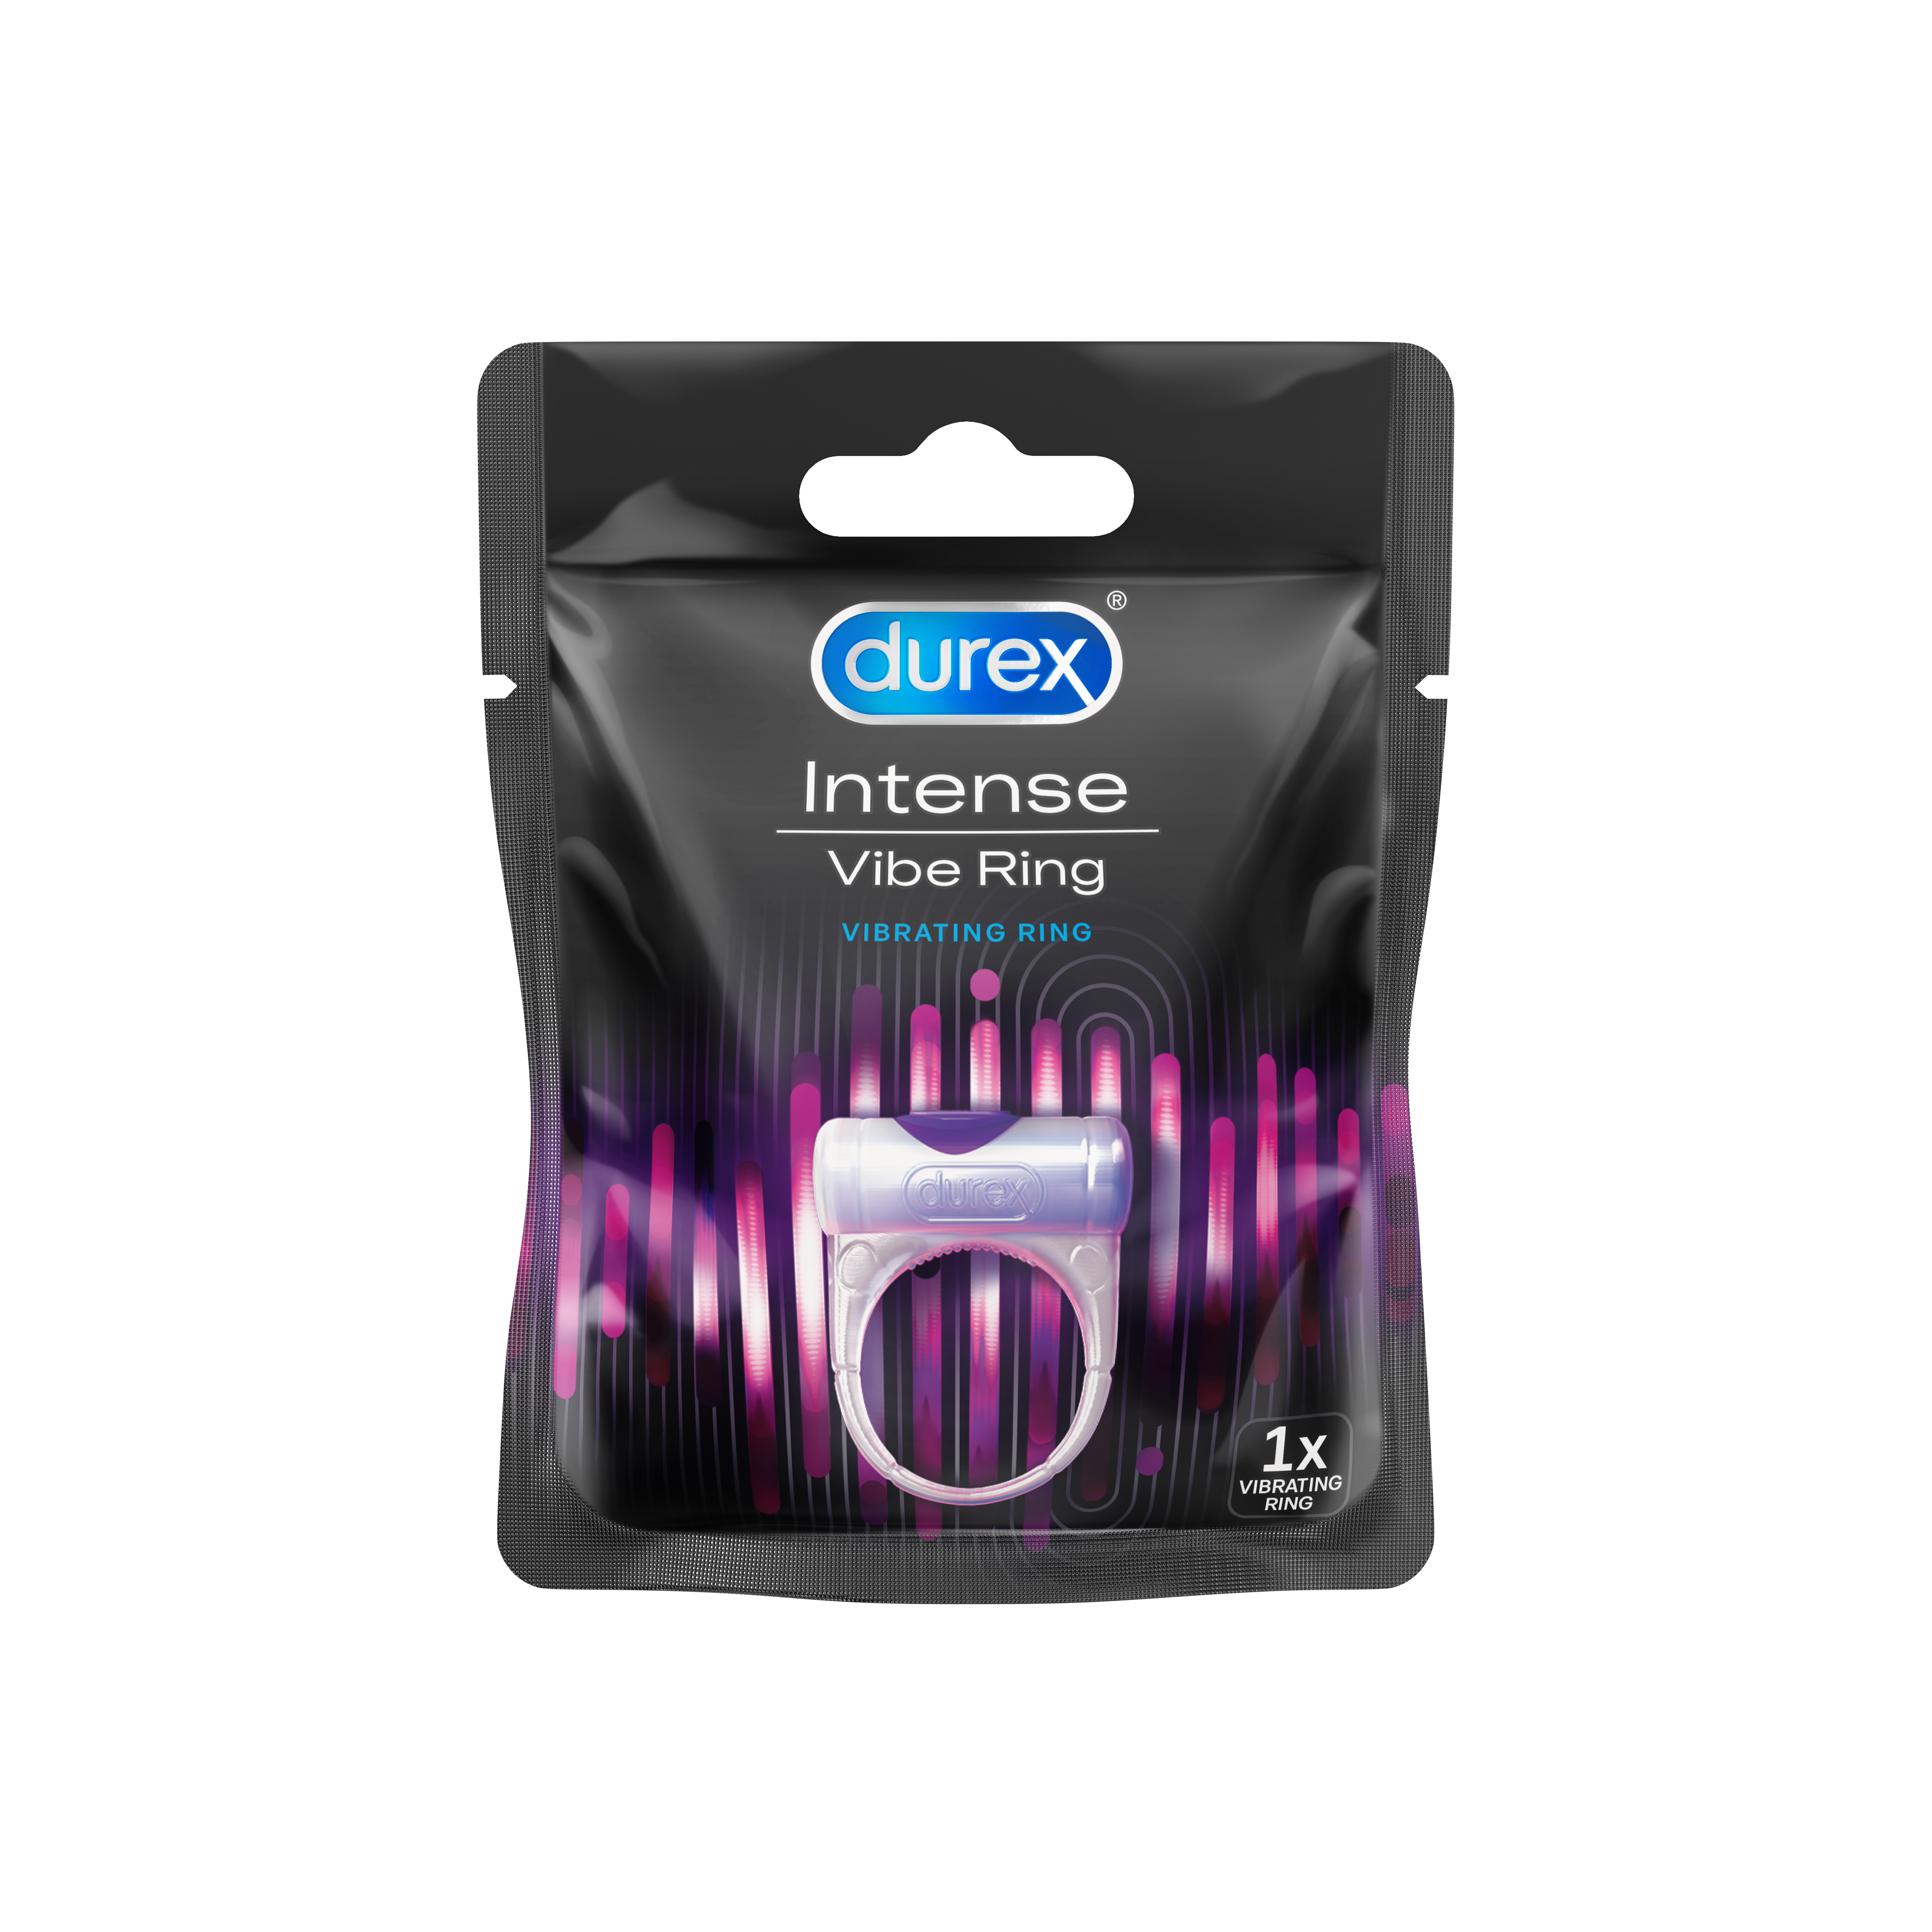 Durex Play Vibrating Ring, 1 Pc and Durex Mutual Climax Condoms - 10 Count  with Cherry Lubricant Gel - 50ml : Amazon.in: Health & Personal Care